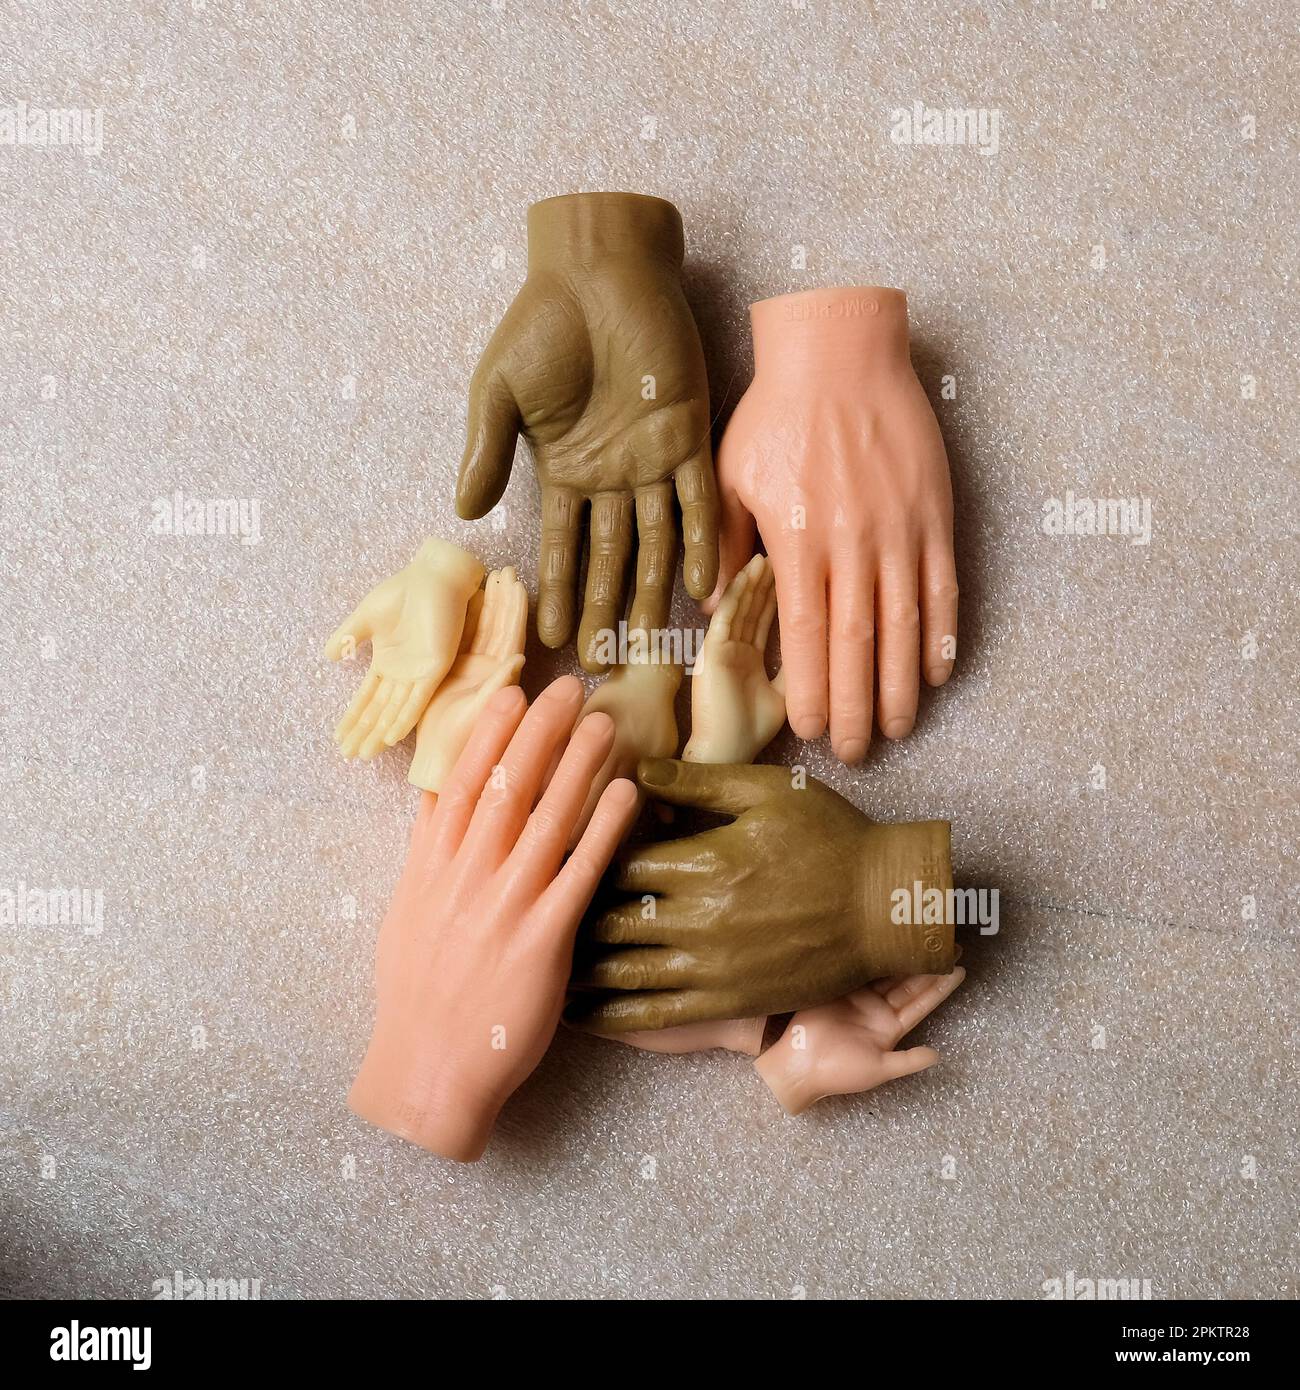 Plastic toy finger hands in different skin tones; help, assistance, harmony, diversity concept; tiny finger hands. Stock Photo